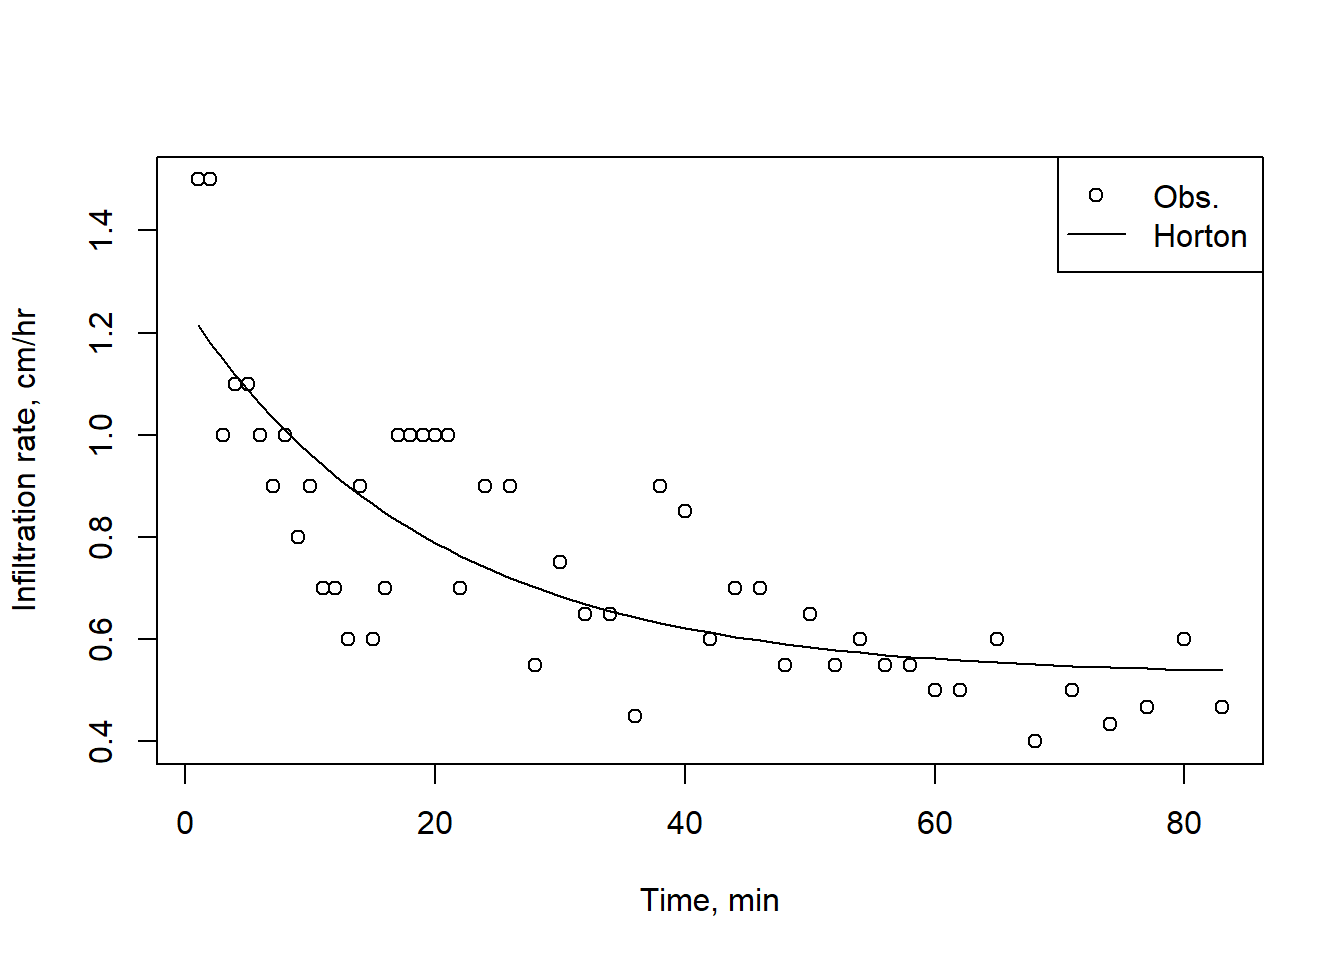 A Horton infiltration curve fit to experimental observations.